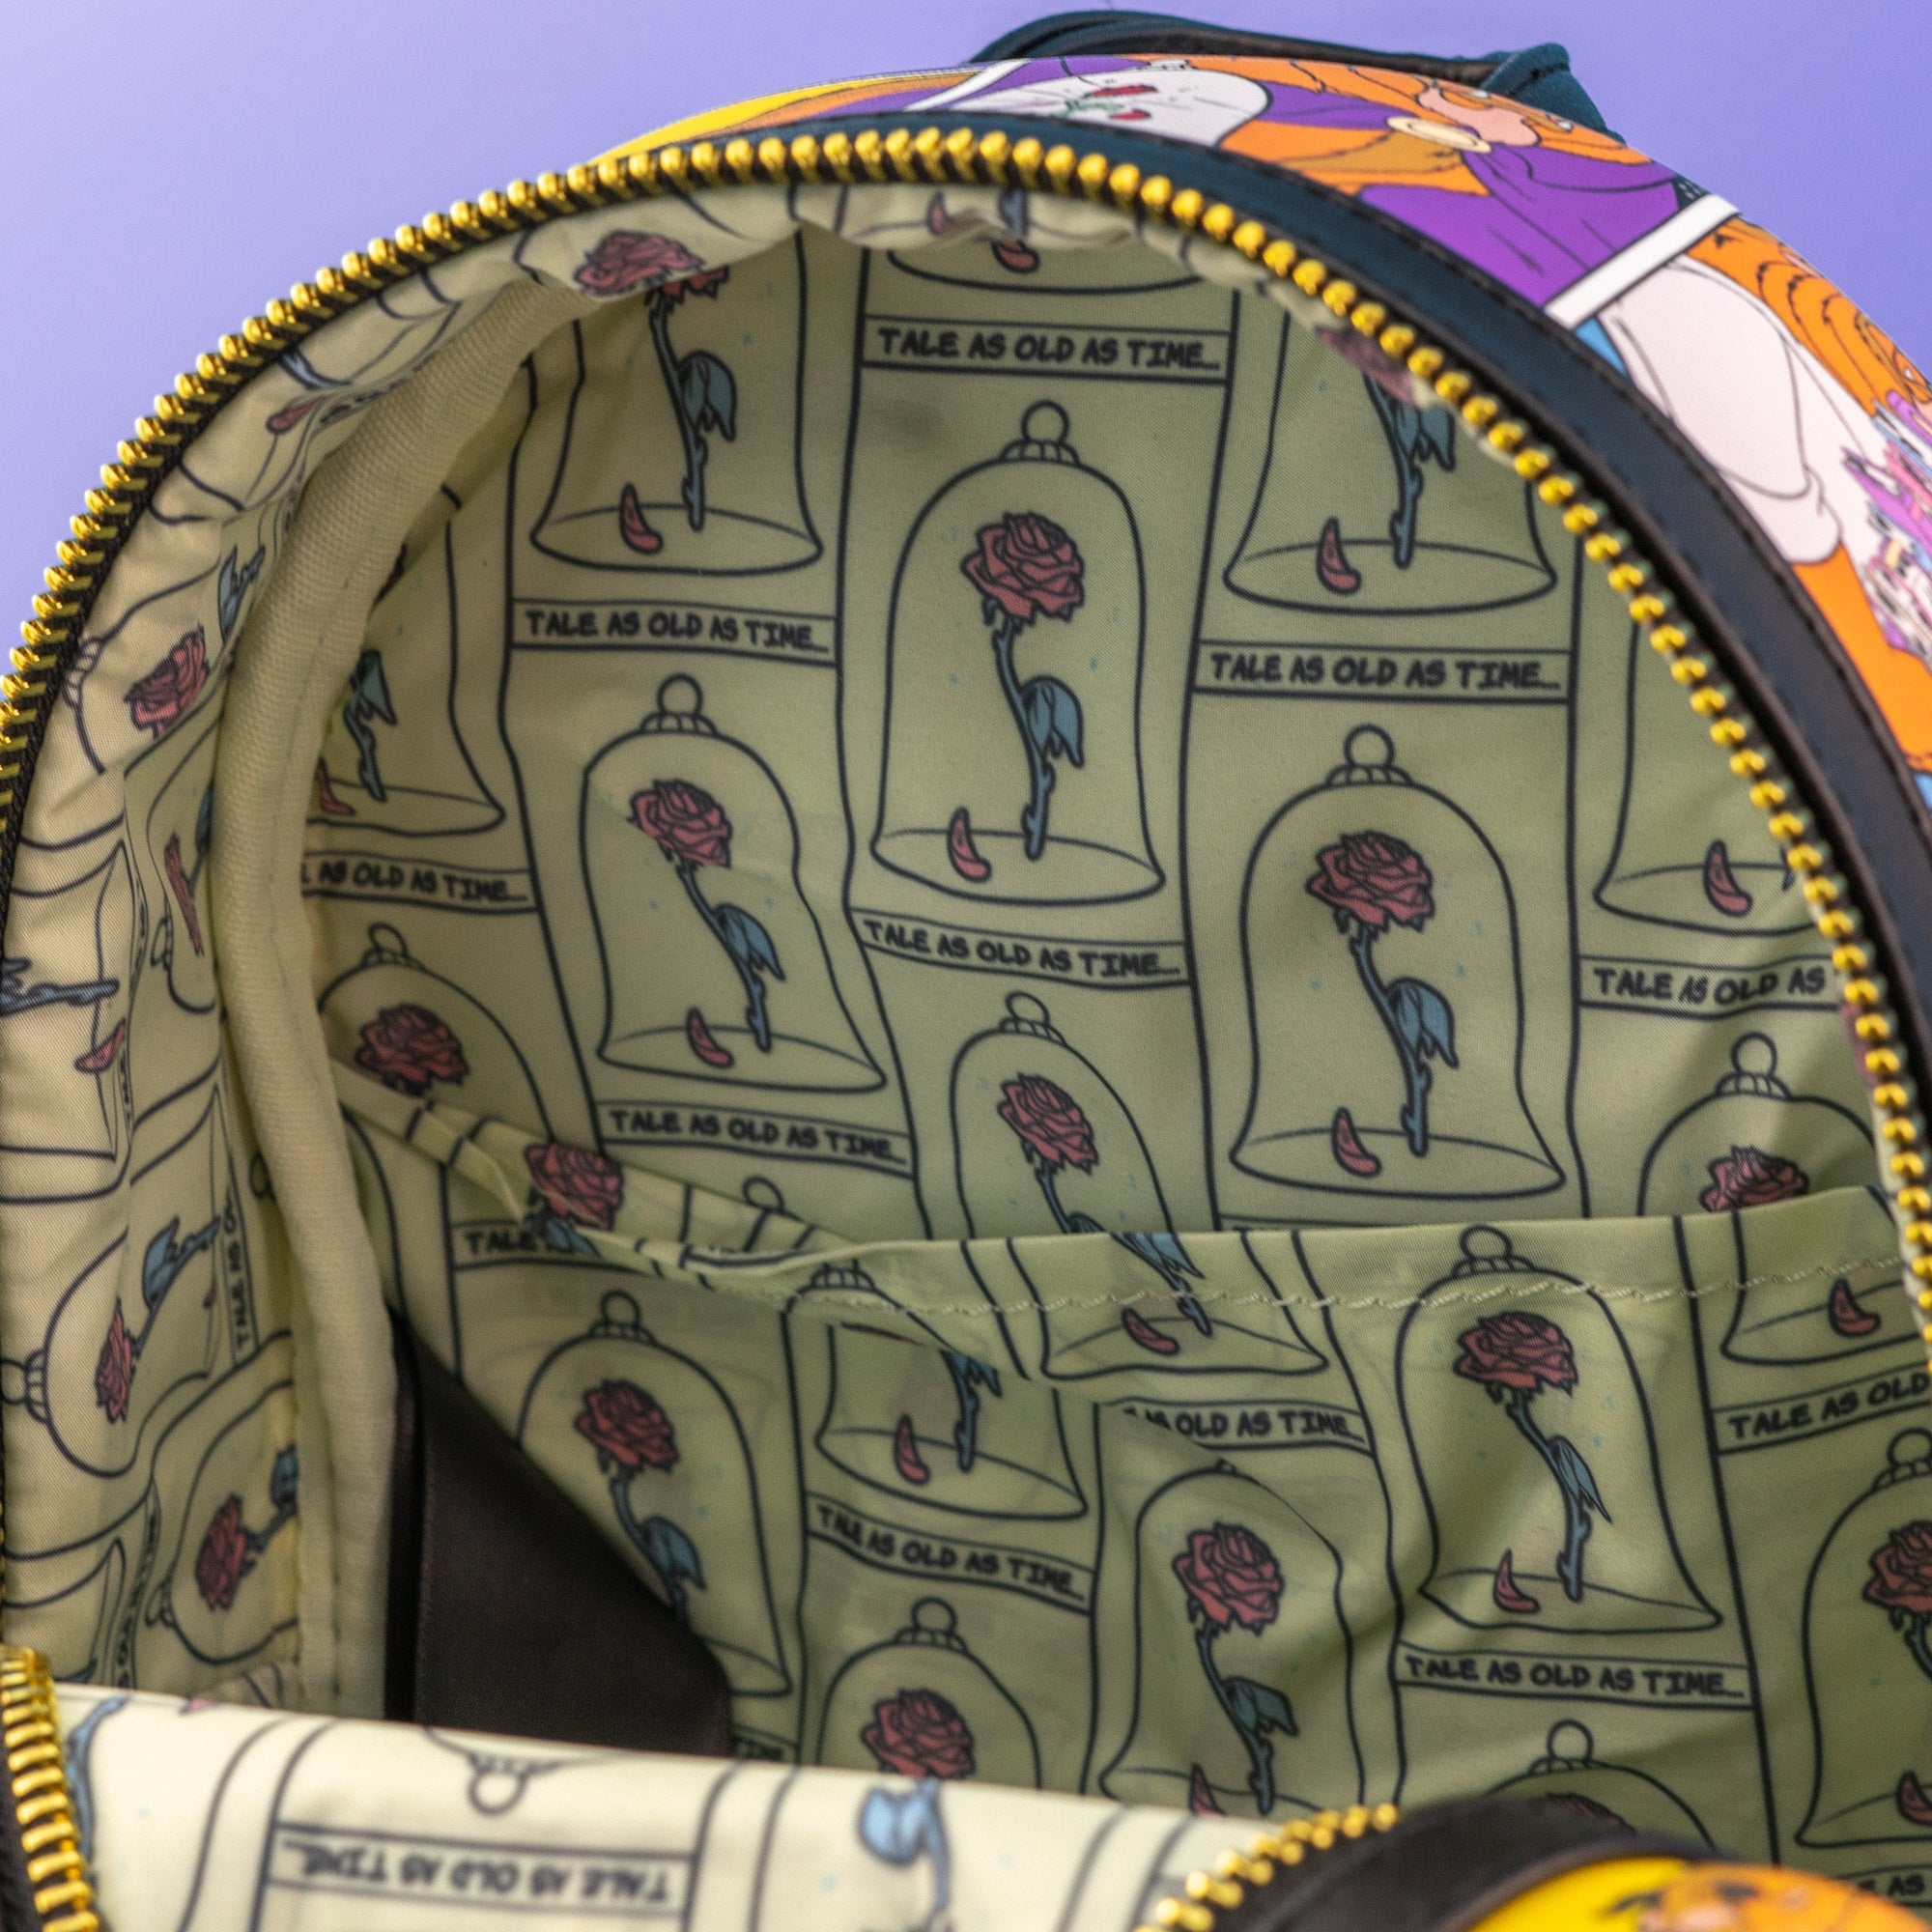 Loungefly x Disney Beauty and the Beast Comic Strip Mini Backpack - GeekCore